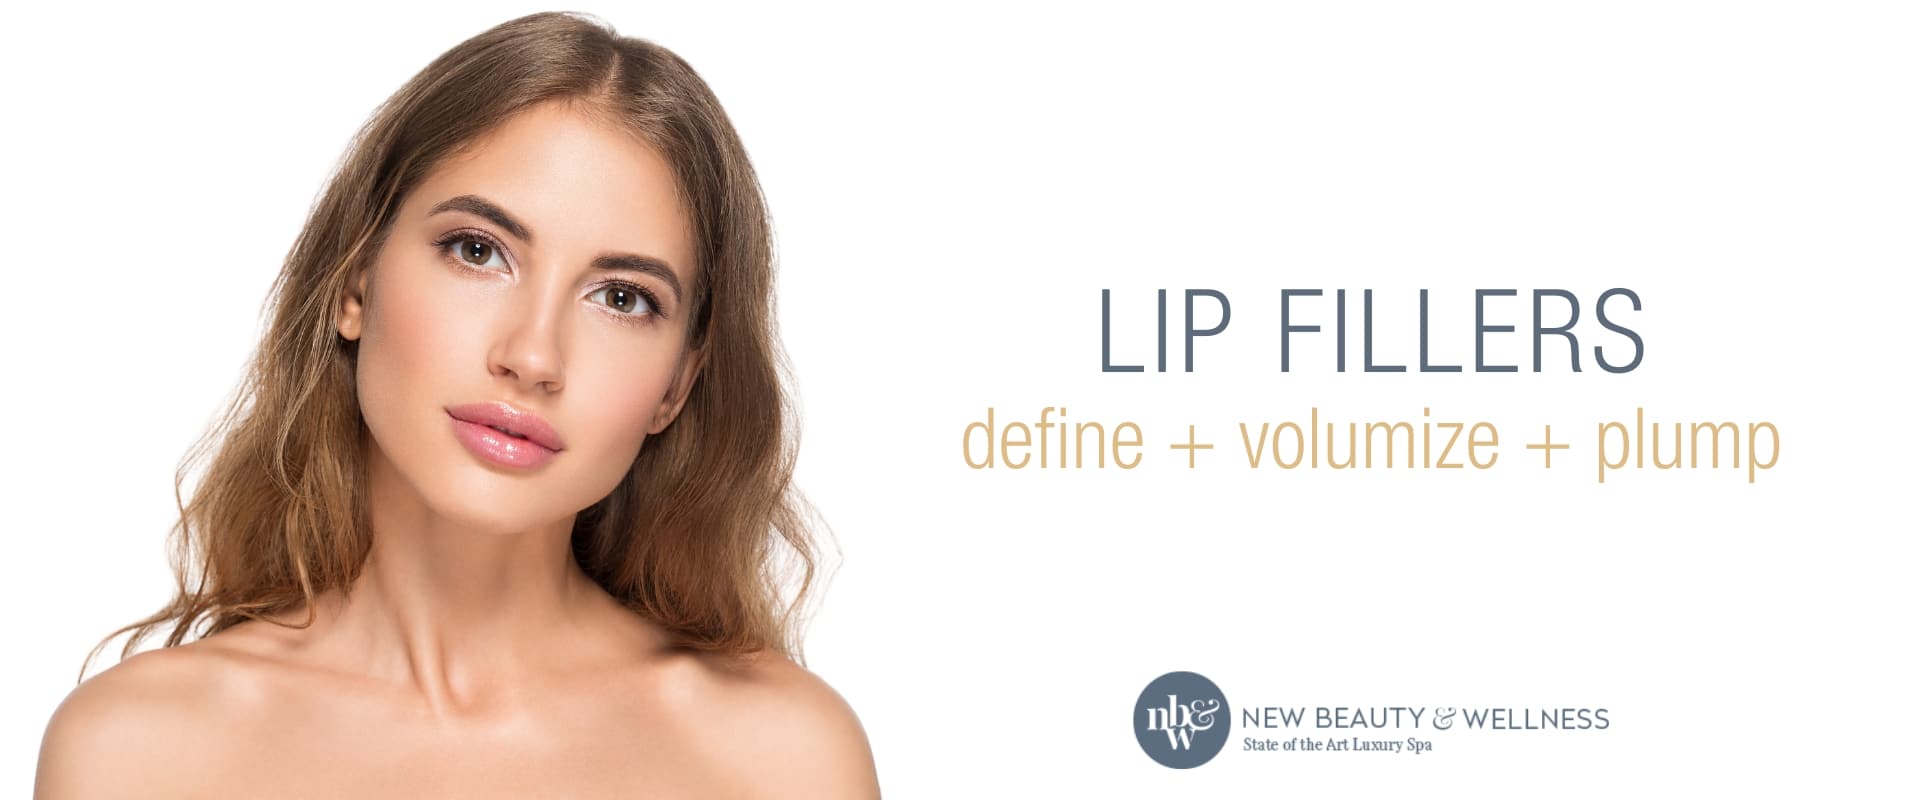 Young woman with beautiful lips promoting lip fillers-a treatment offered at New Beauty & Wellness